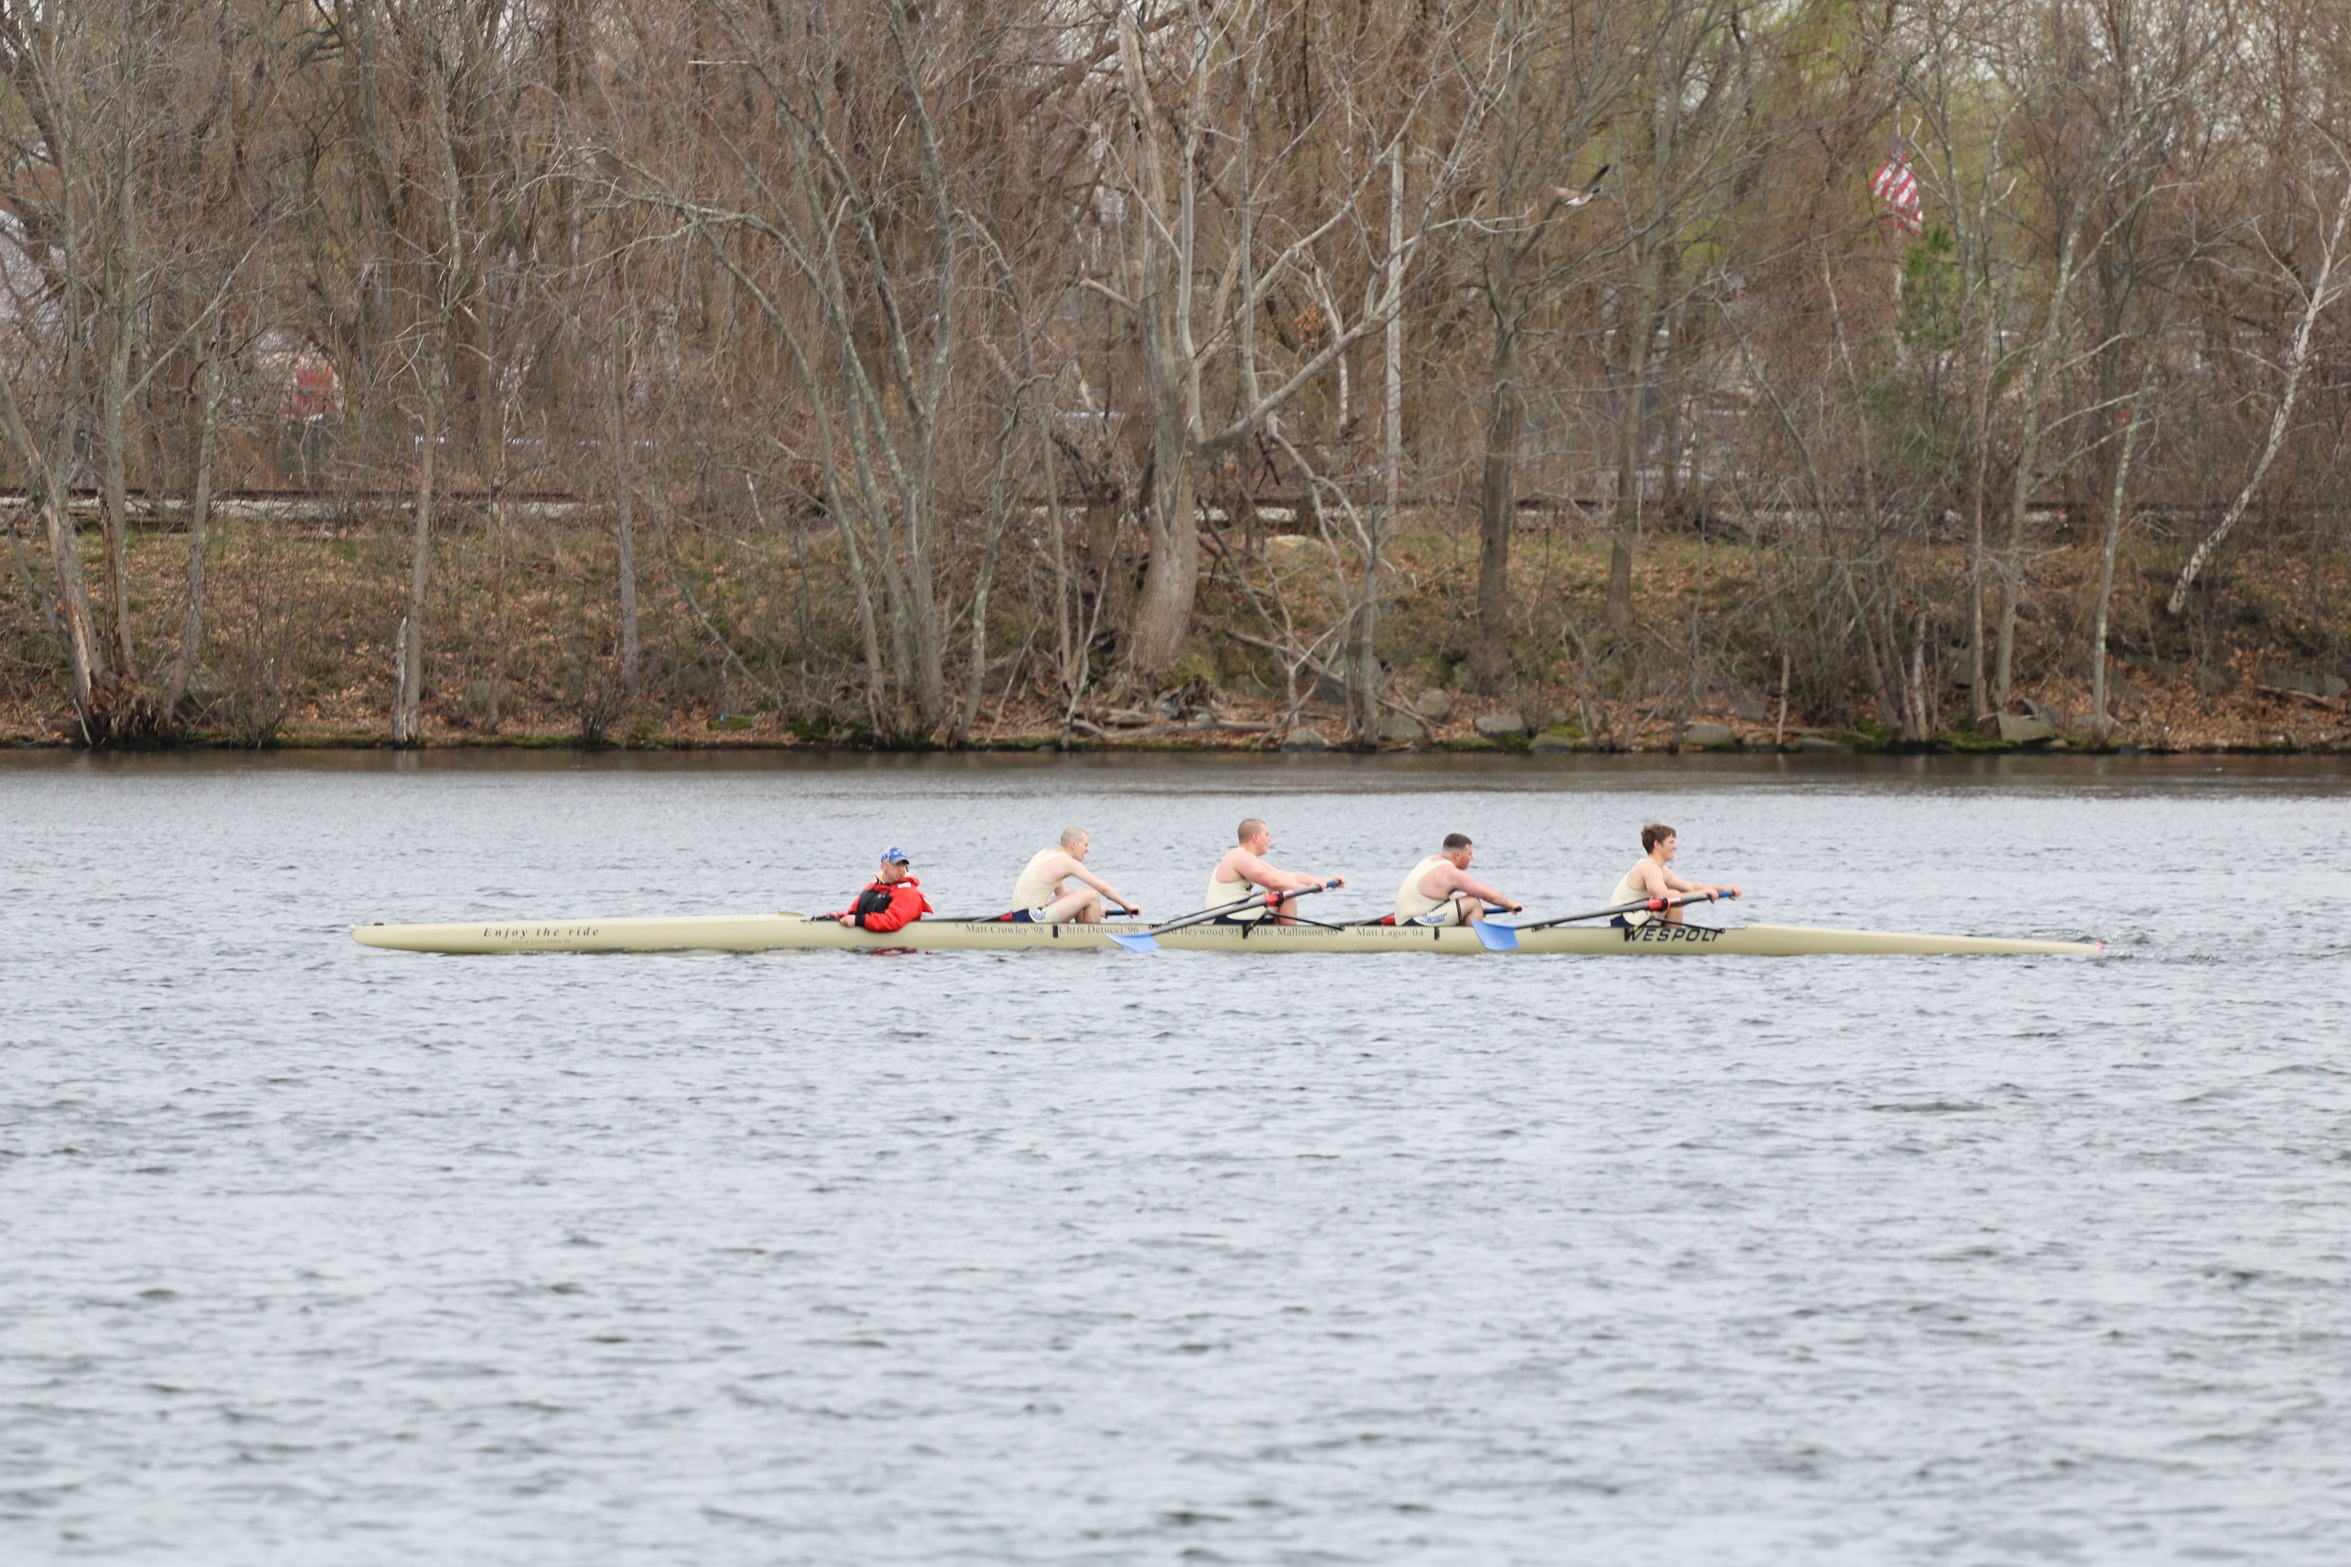 Men's Rowing Finishes 41st at Head of the Charles